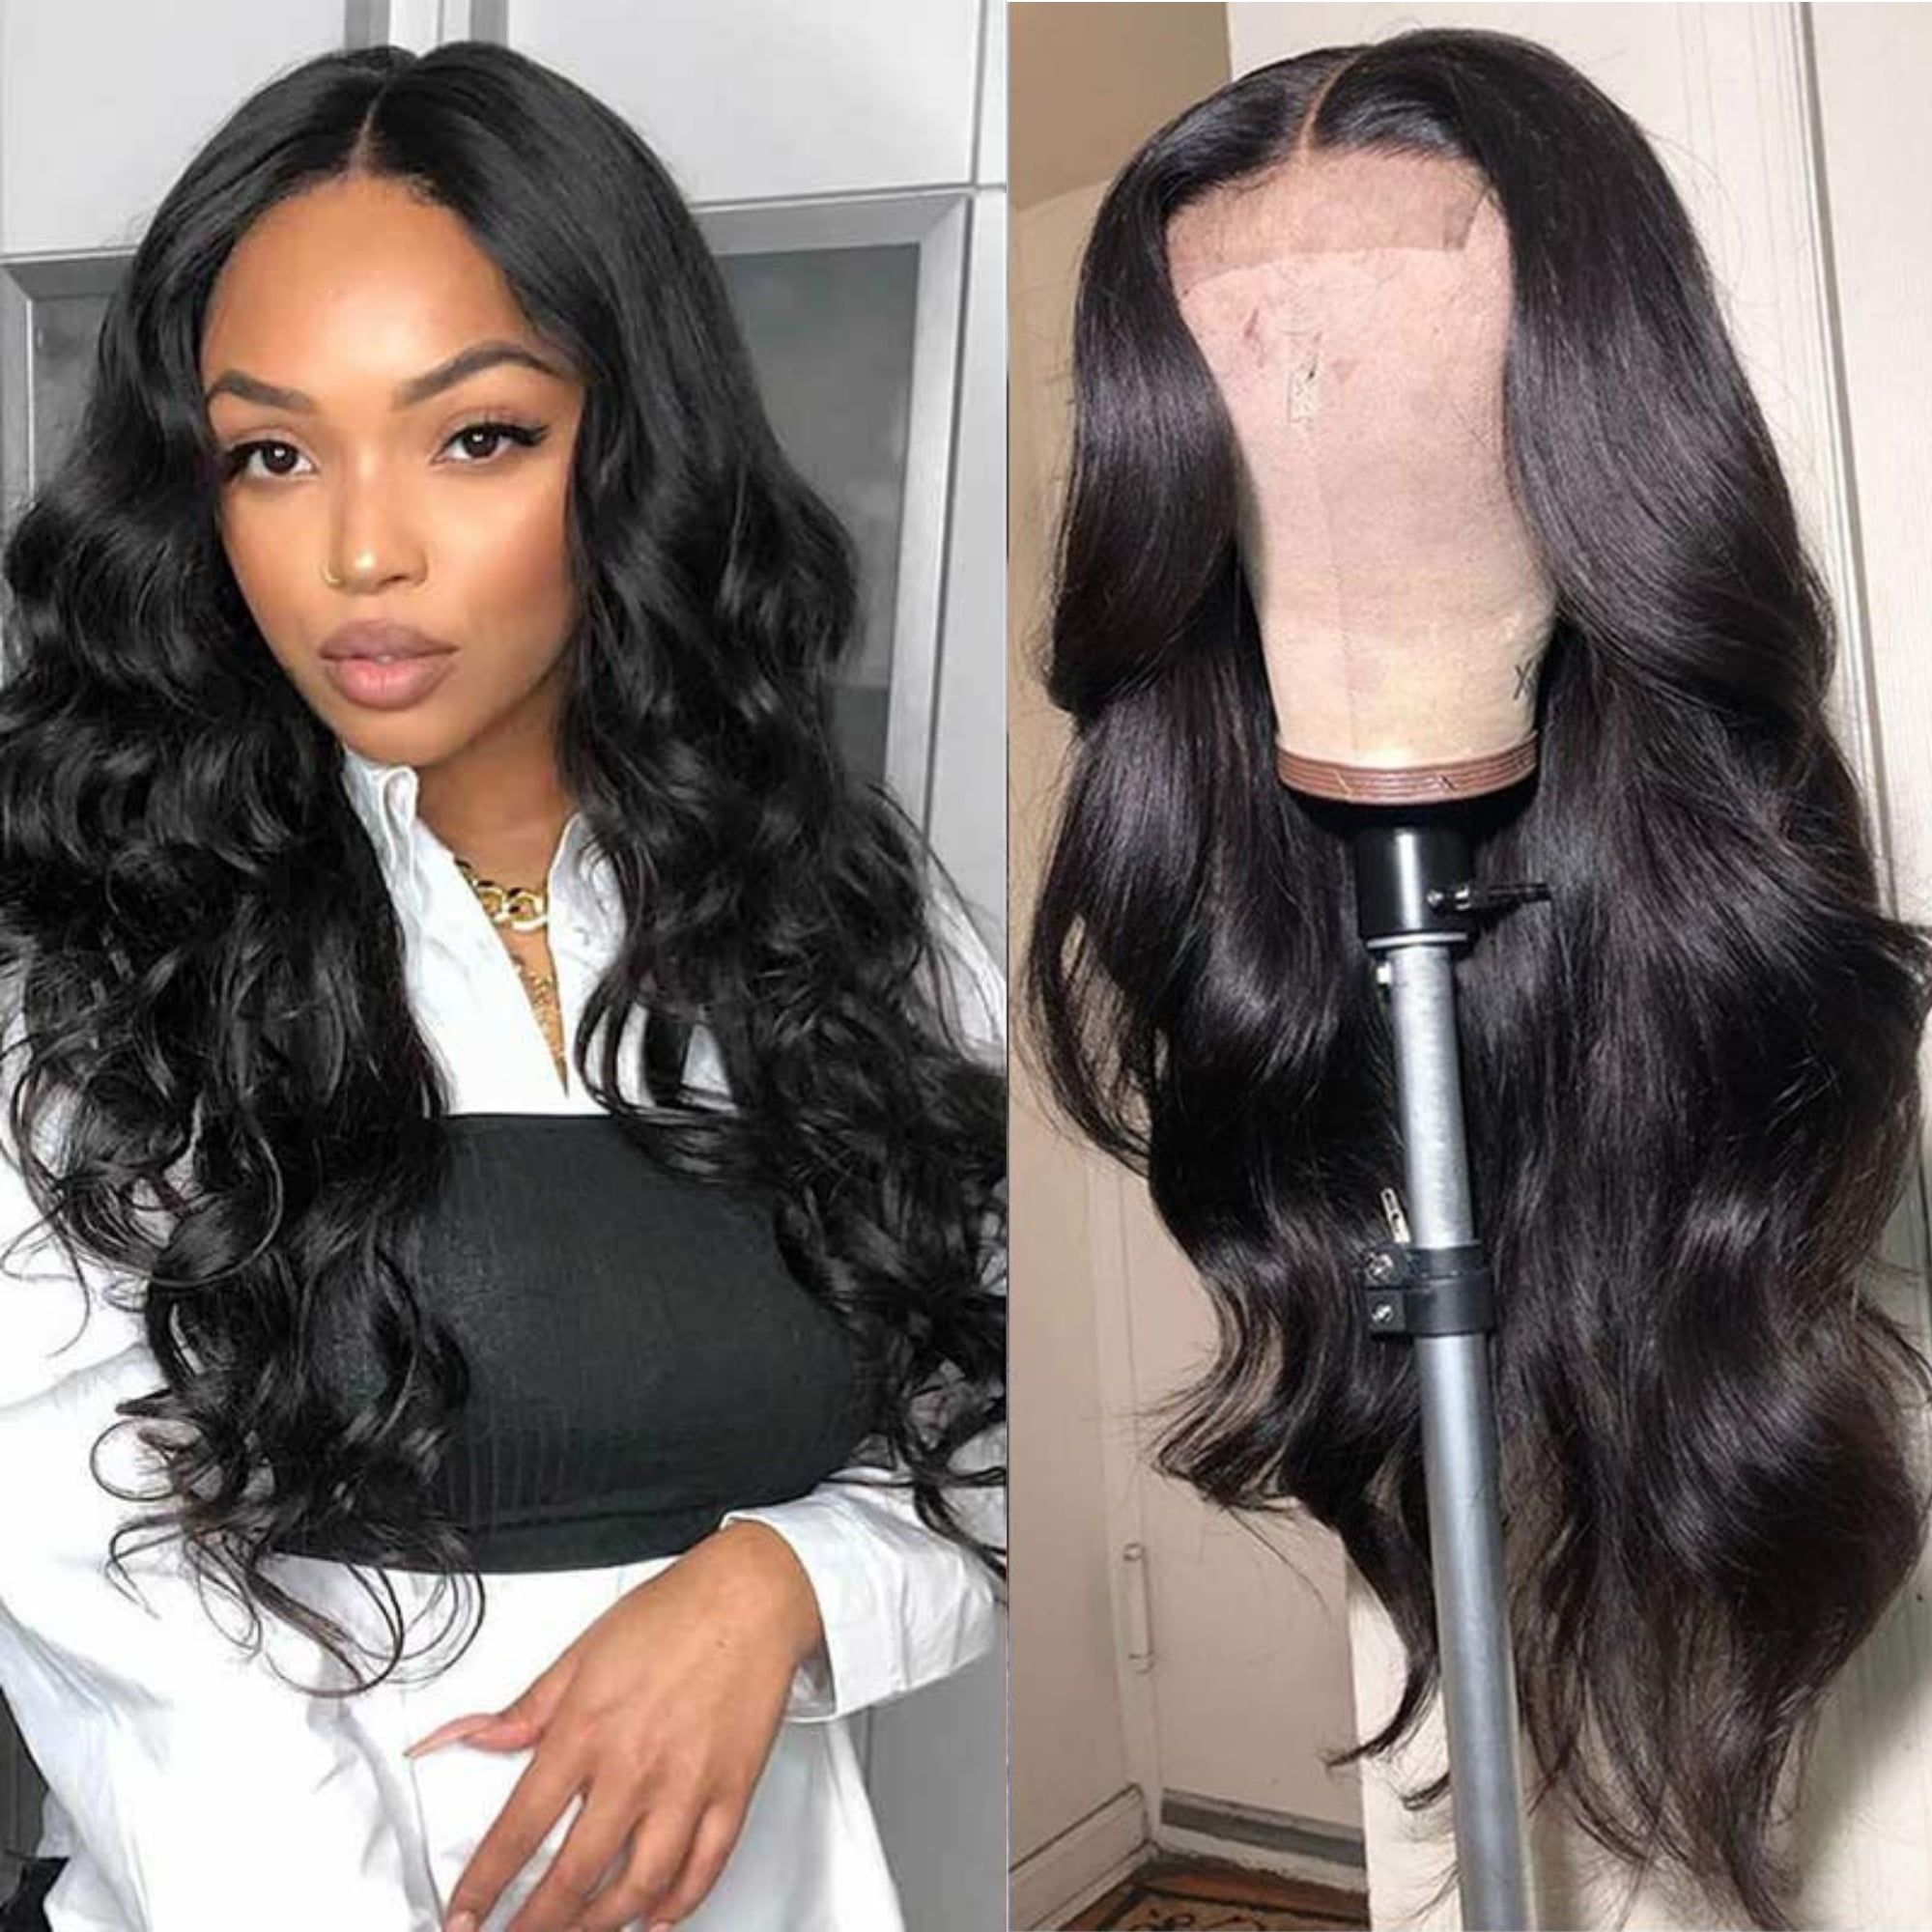 Lace Front Wigs Human Hair Pre Plucked 28 Inch Long Wavy Wigs For Black